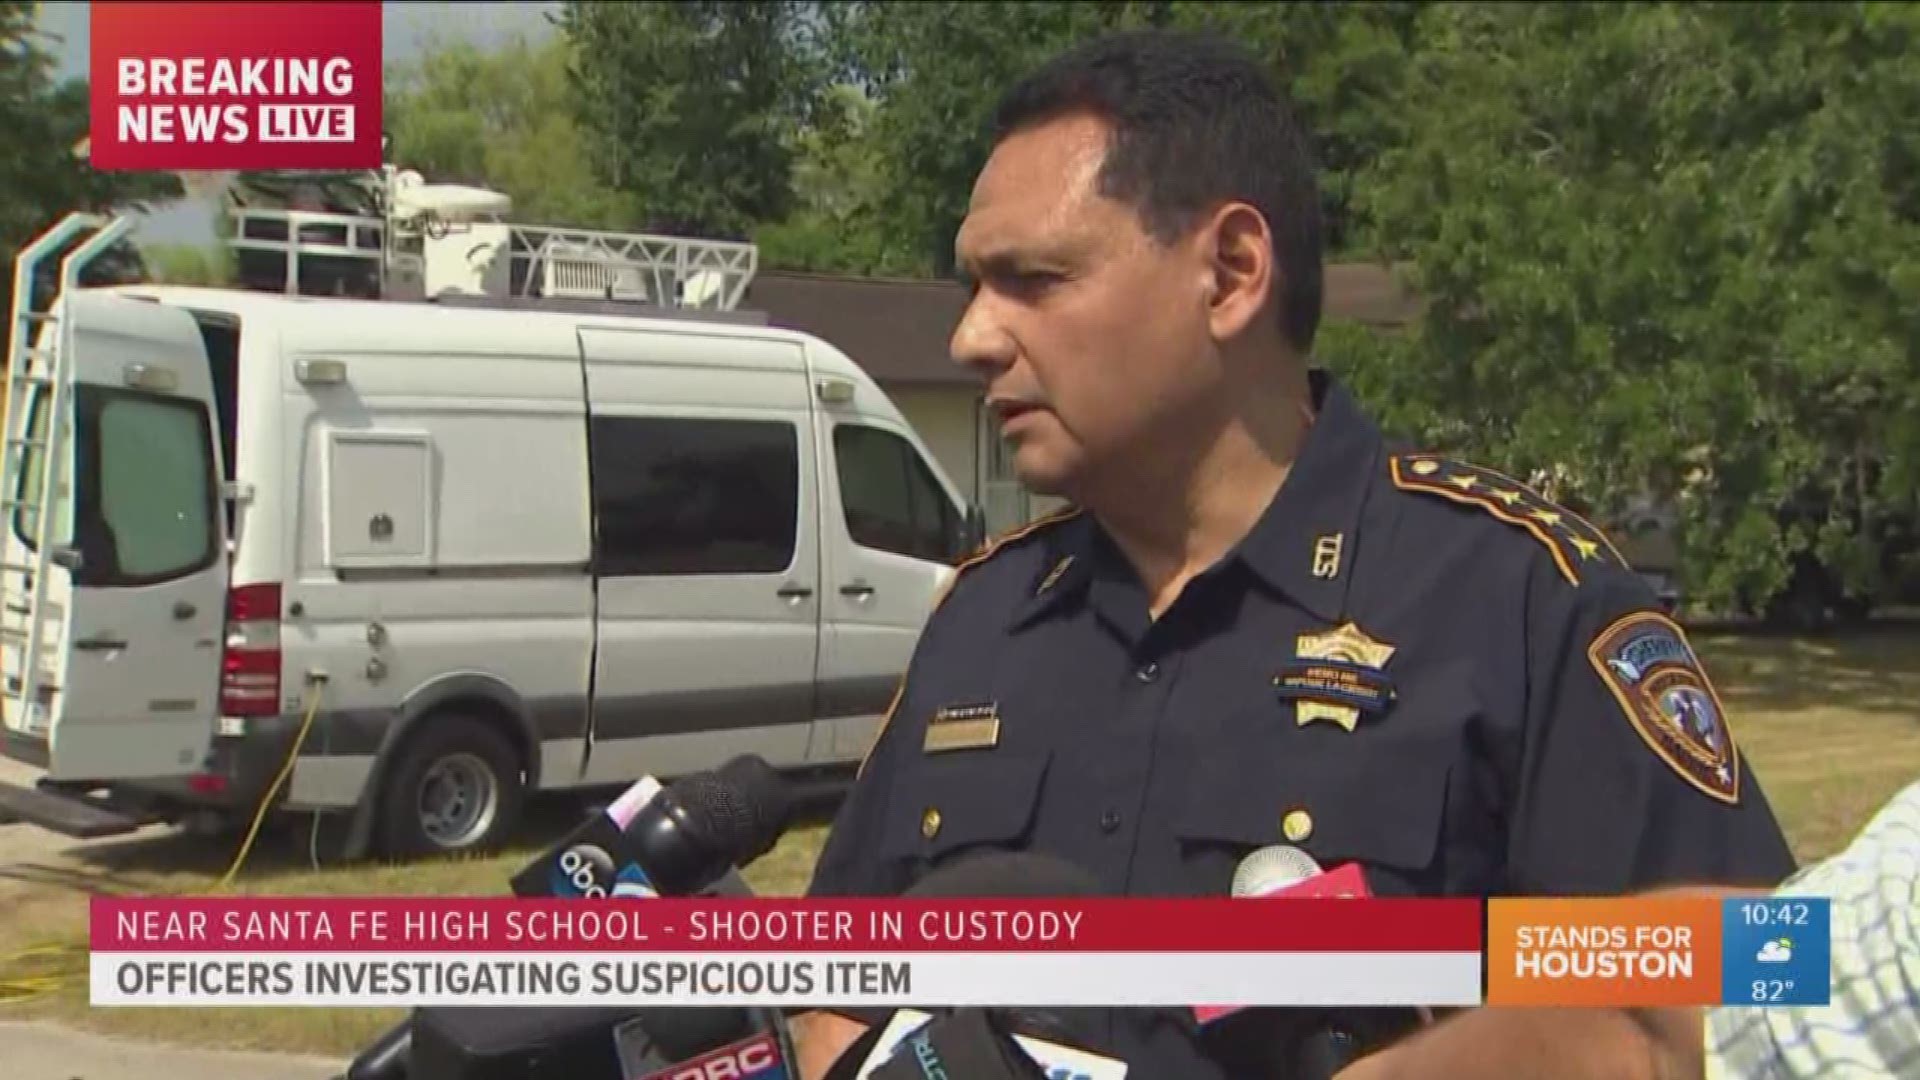 Sheriff Ed Gonzalez says between 8-10 people were killed in the shooting at Santa Fe High School this morning in Texas. 